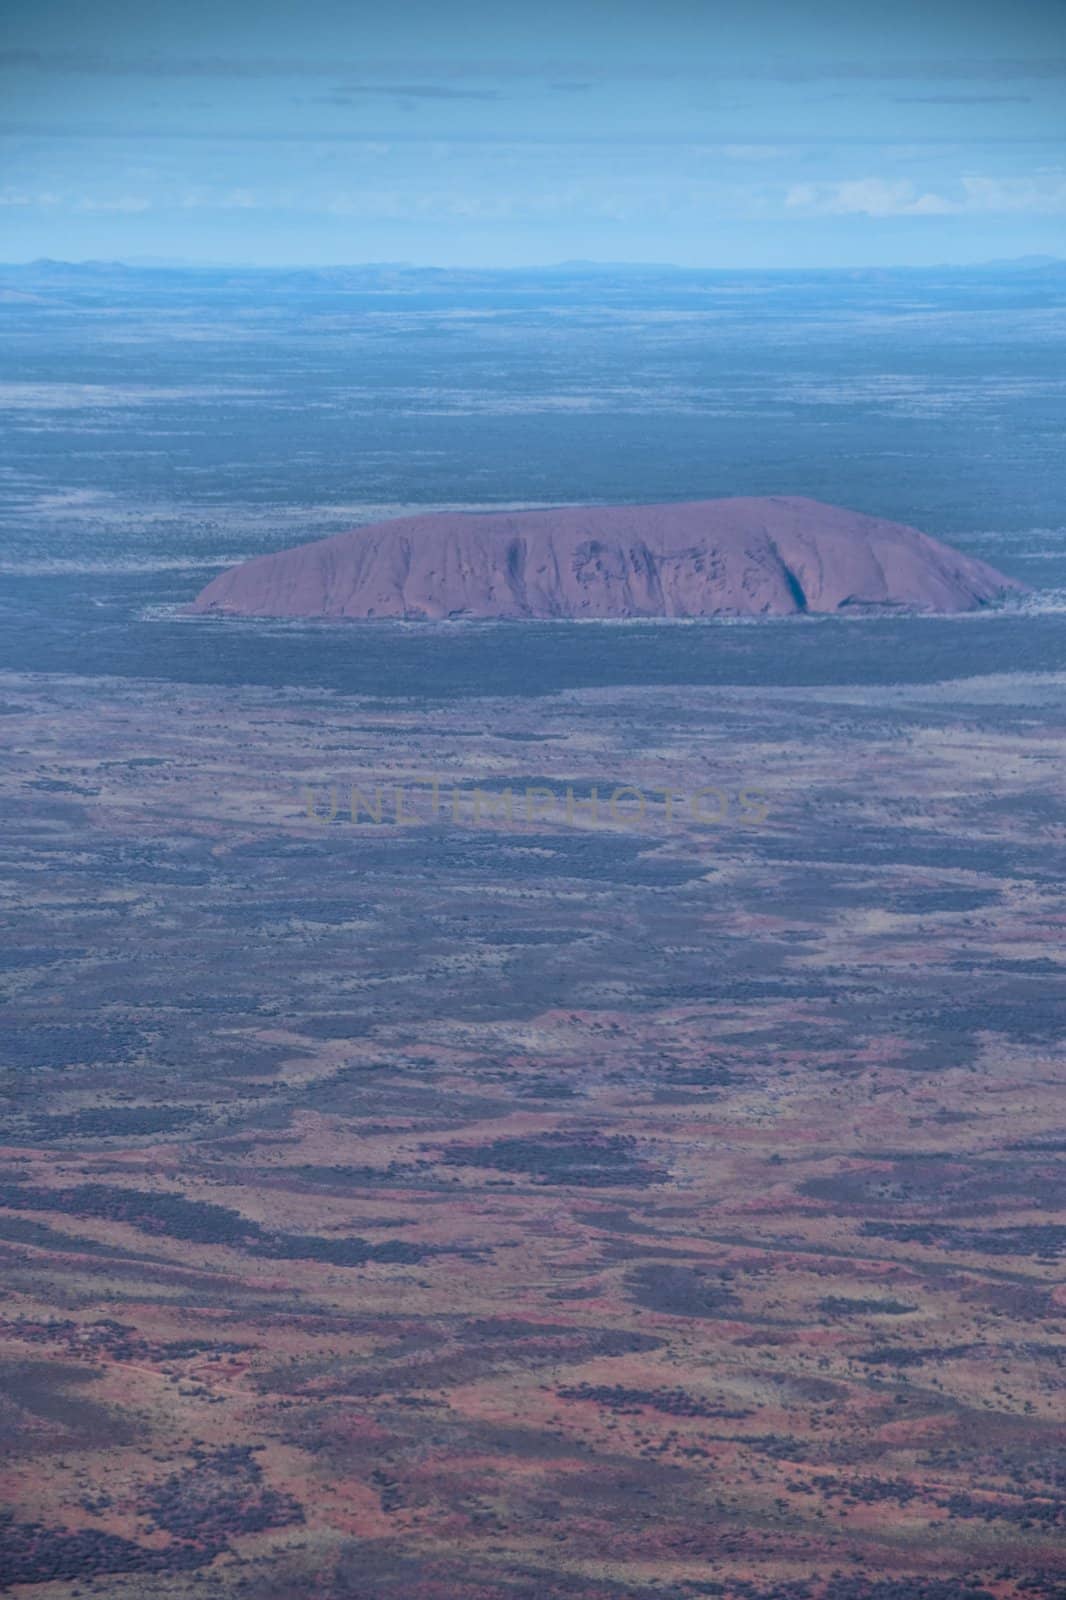 Aerial View of the Australia Outback near Ayers Rock